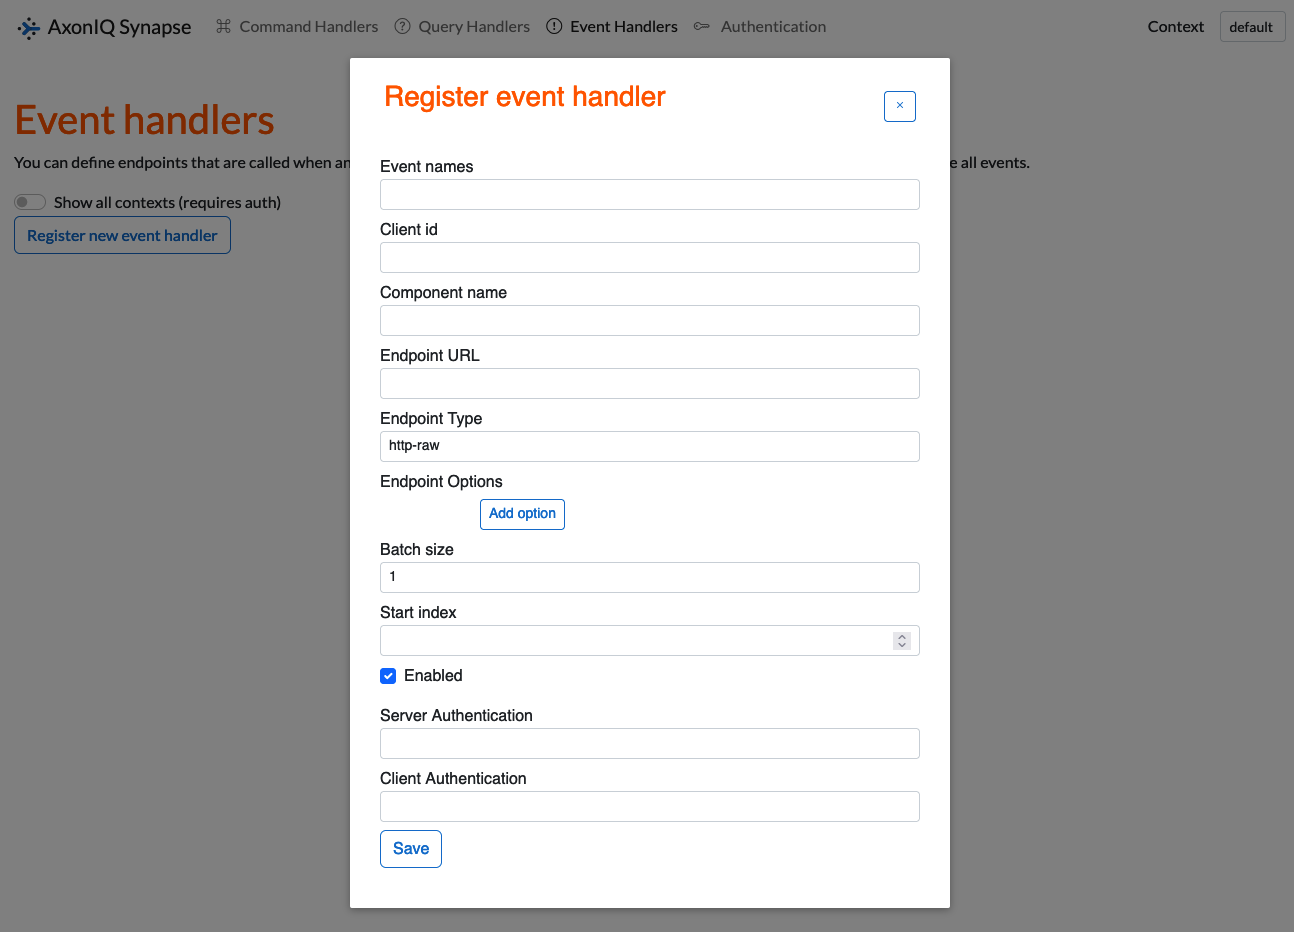 "Screenshot of the Axon Synapse UI for registering a new event handler